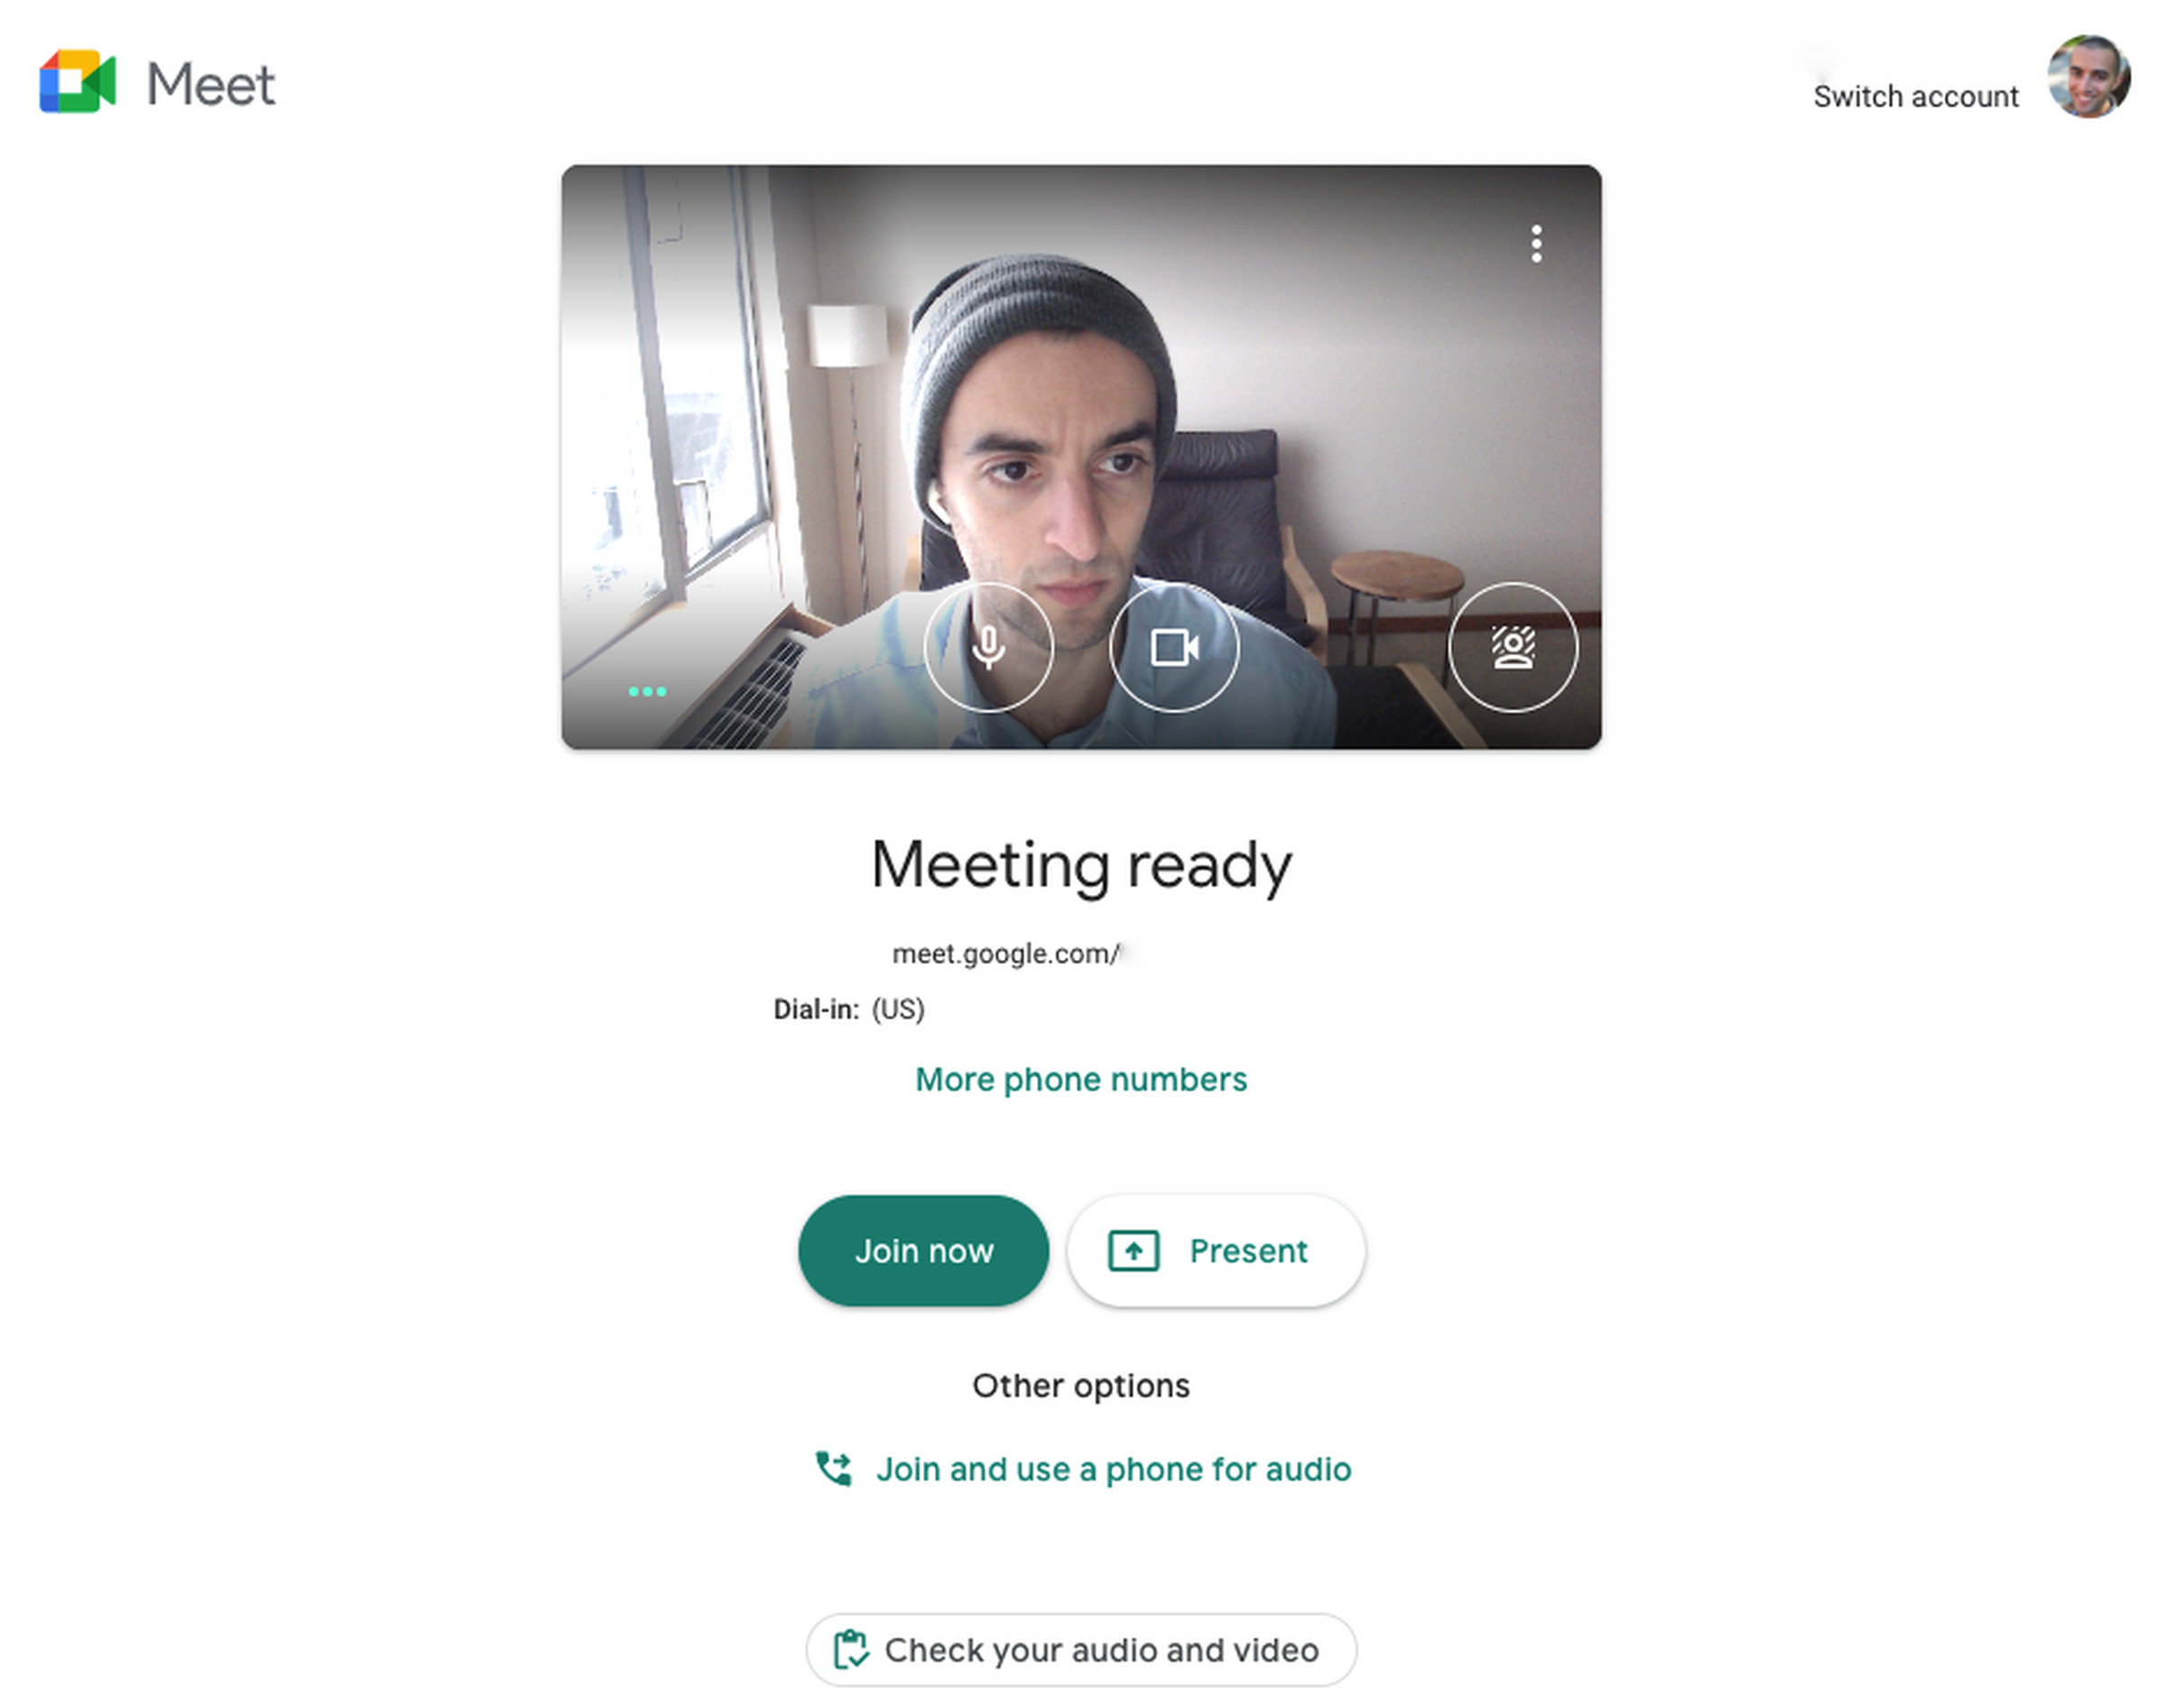 Google Meet’s “green room” lets you check your audio and video.